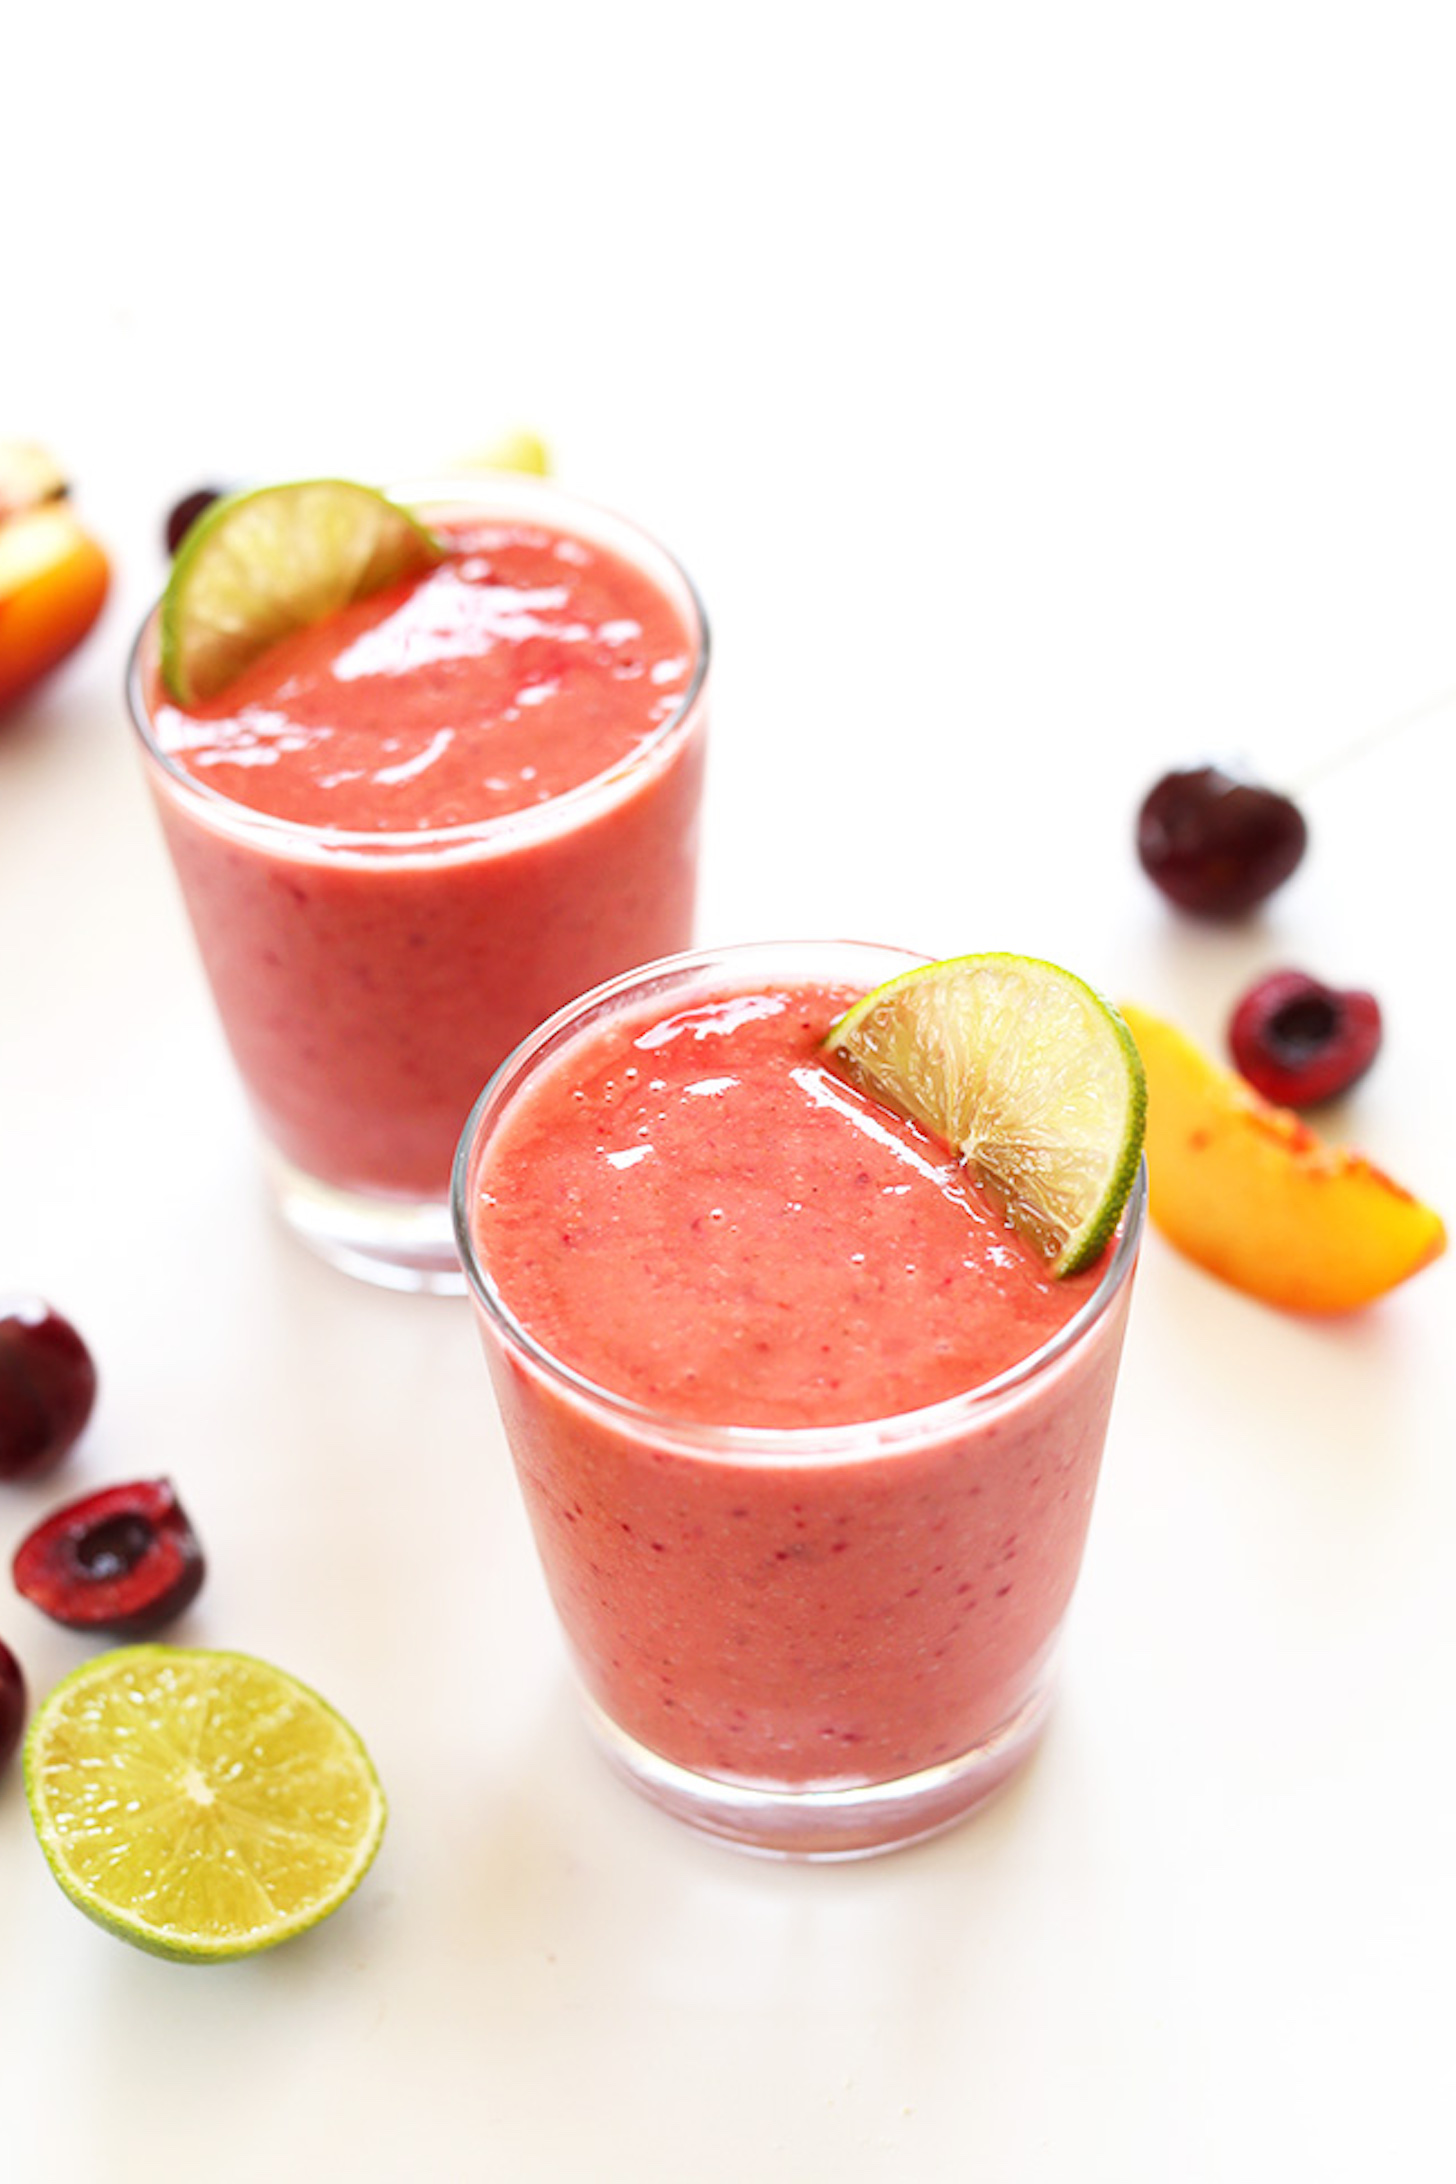 BlendJet Recipes: 10 Delicious Smoothies You Need to Try Now